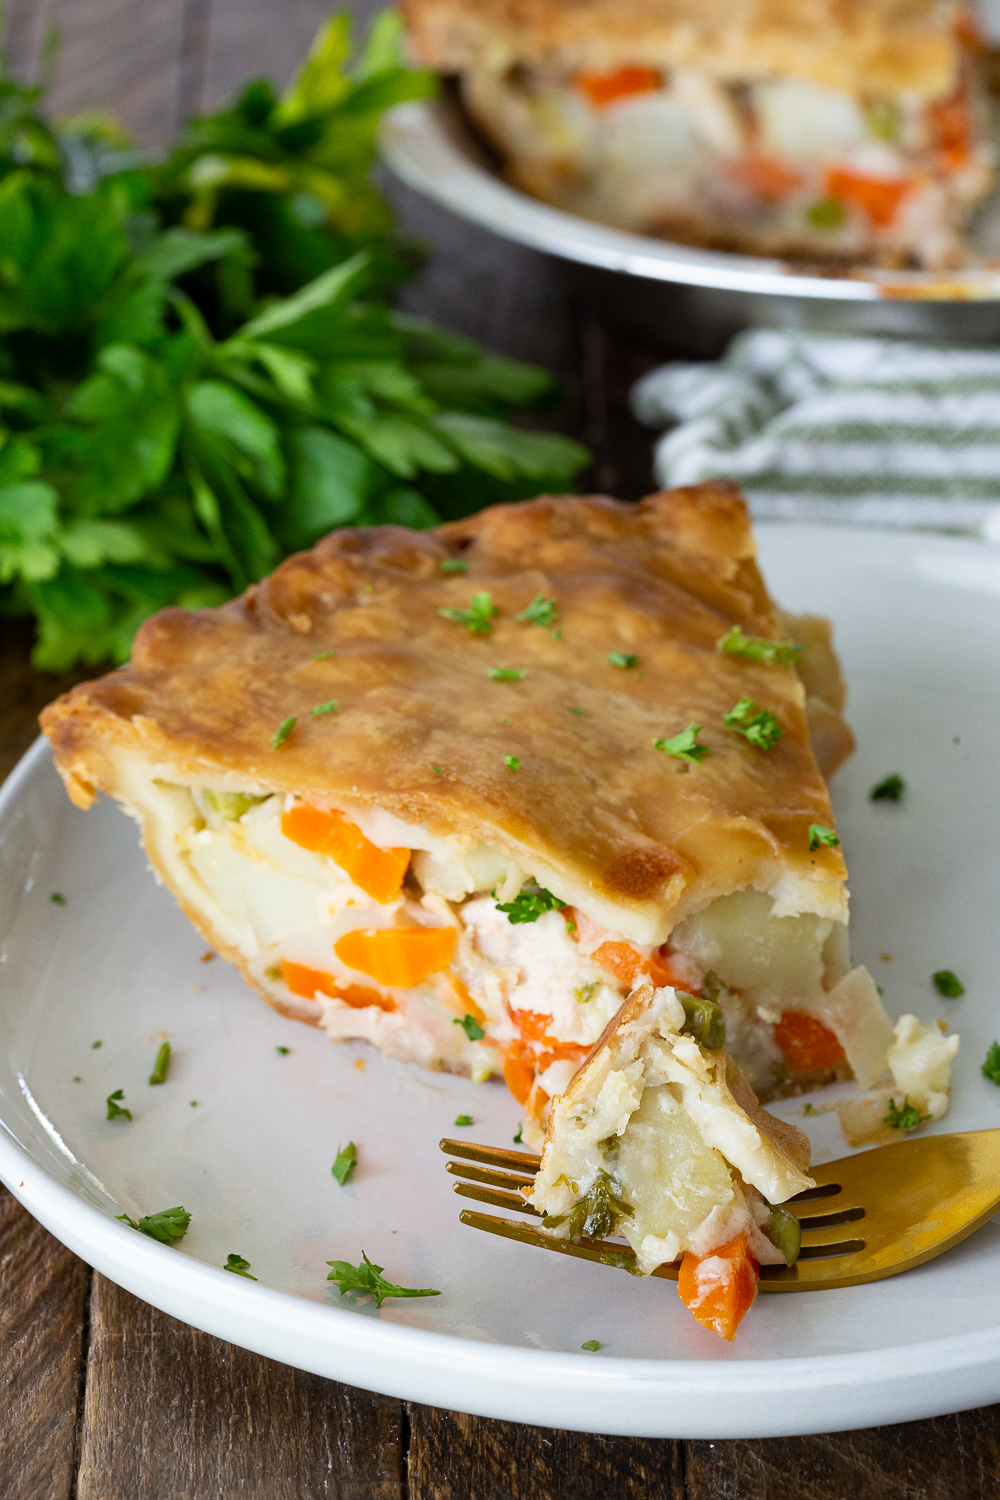 Chicken pot pie , a delicious creamy interor loaded with potatoes and carrots and chicken